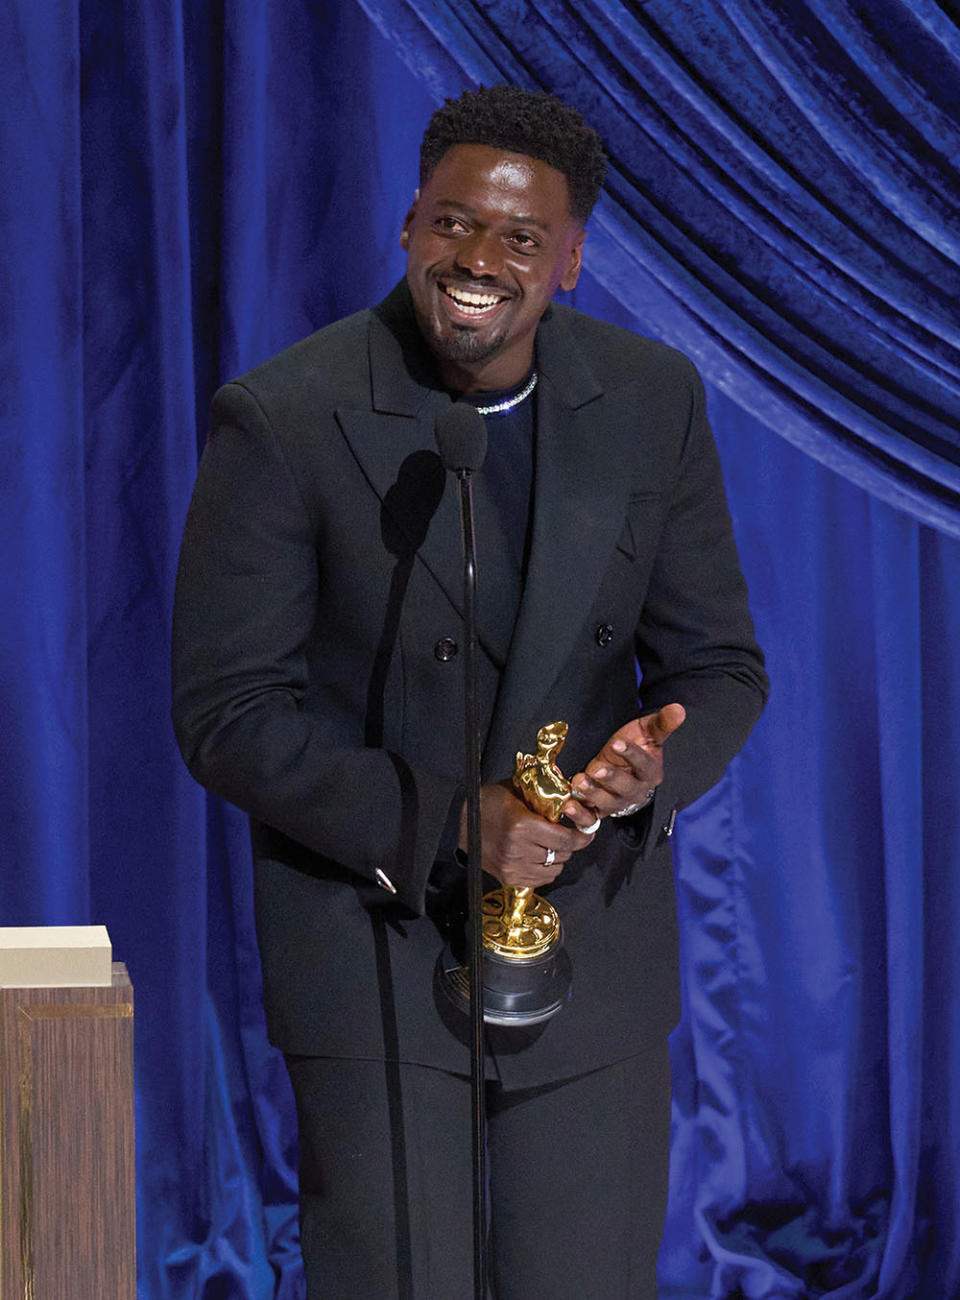 Kaluuya accepts the Academy Award for his supporting performance in Judas and the Black Messiah at the 2021 Oscars ceremony. - Credit: Todd Wawrychuk/A.M.P.A.S. via Getty Images